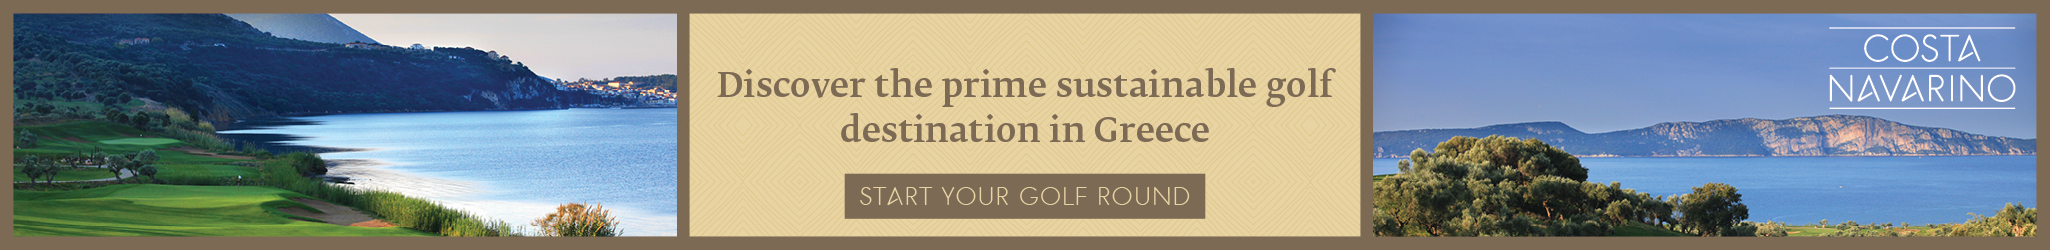 Discover the prime sustainable golf destination in greece